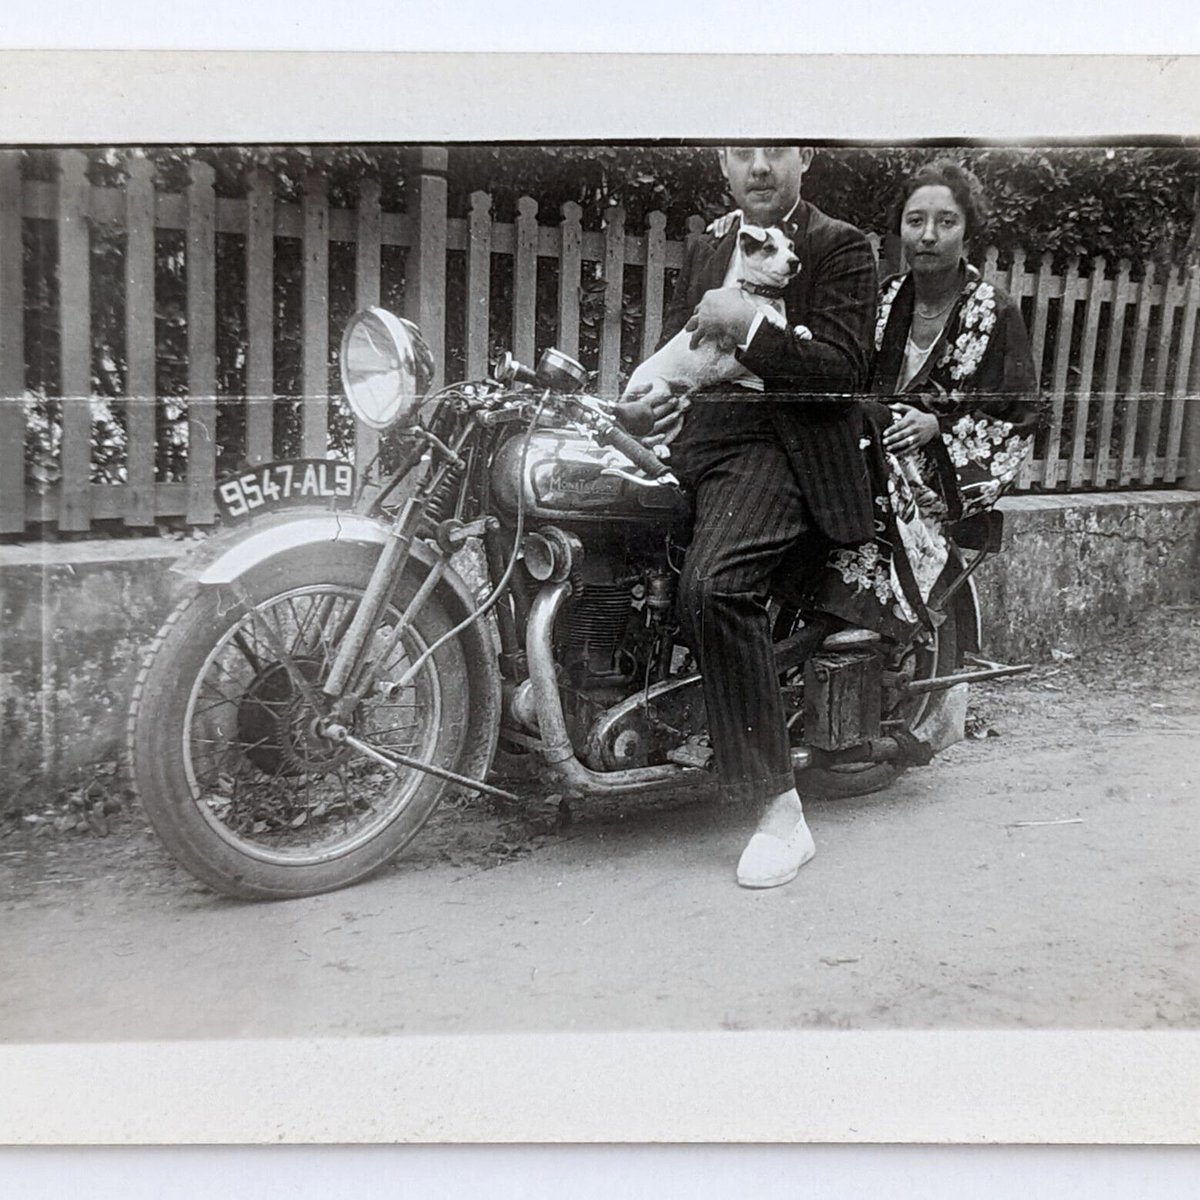 Check out Snapshot Photo Man Woman Jack Russell Terrier Dog On Motorcycle ebay.com/itm/1456569986… @eBay 

#VintagePhoto #VintagePhotograph #Snapshot #SnapshotPhoto #Photography #VintageMotorcycle #VintageDog #VintagePhotography #Photo #Photograph #eBay #eBayStore #DugItOut